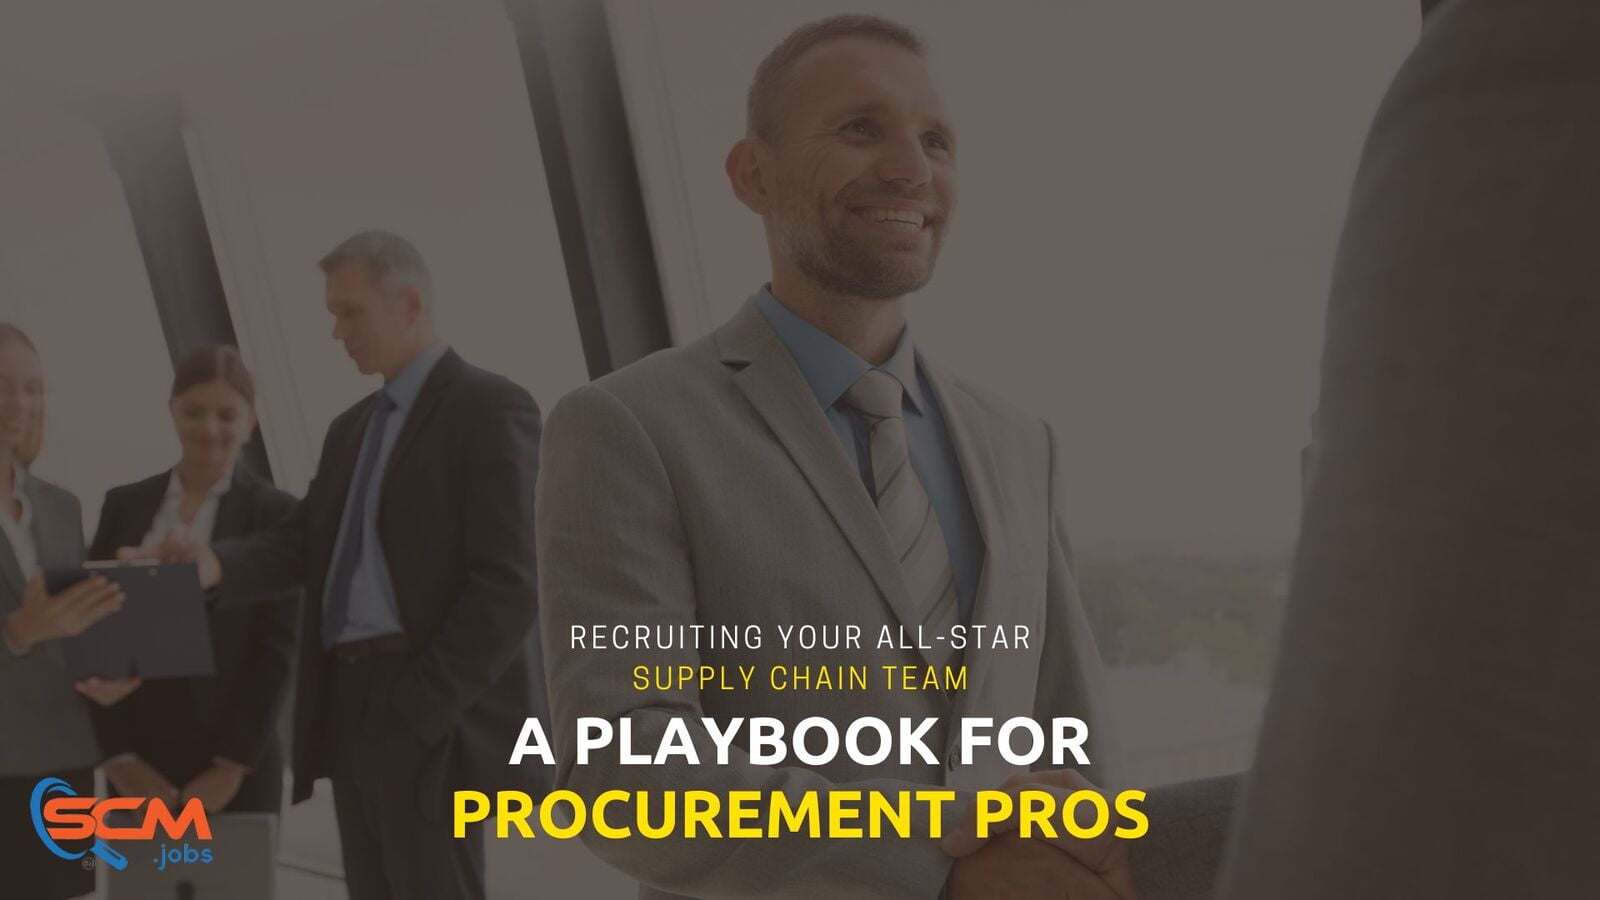 Recruiting Your All-Star Supply Chain Team: A Playbook for Procurement Pros